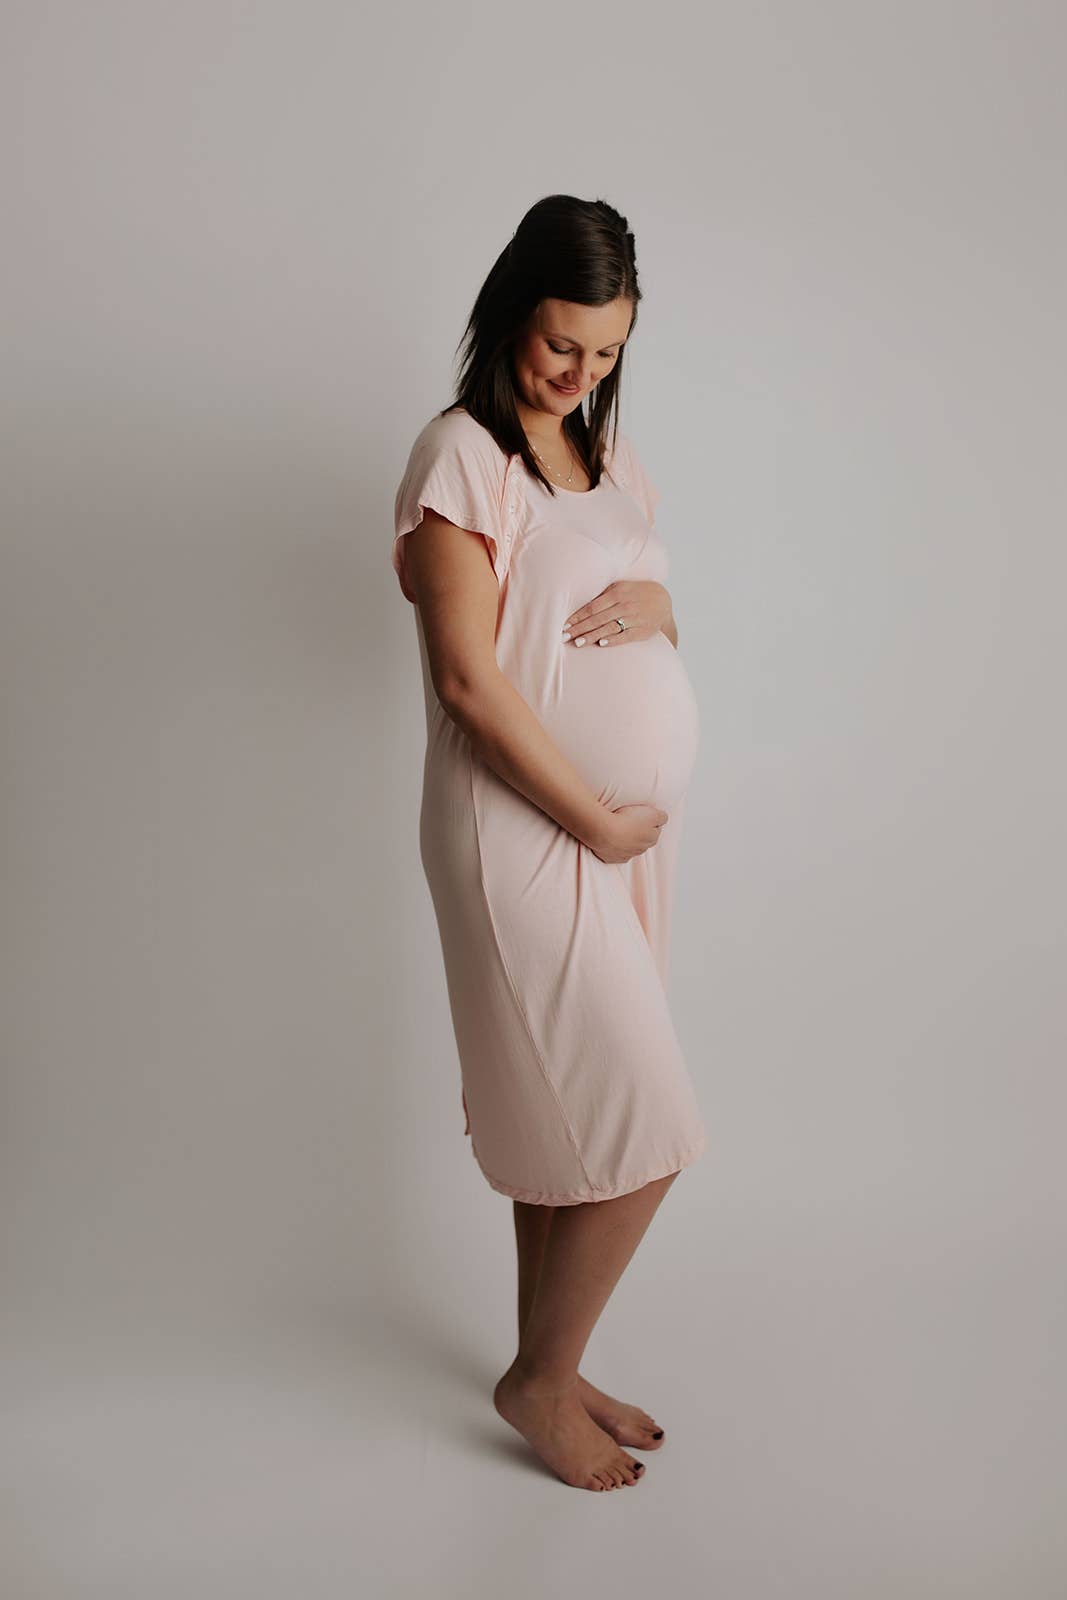 Labor, Delivery, & Nursing Gown - Heavenly Pink